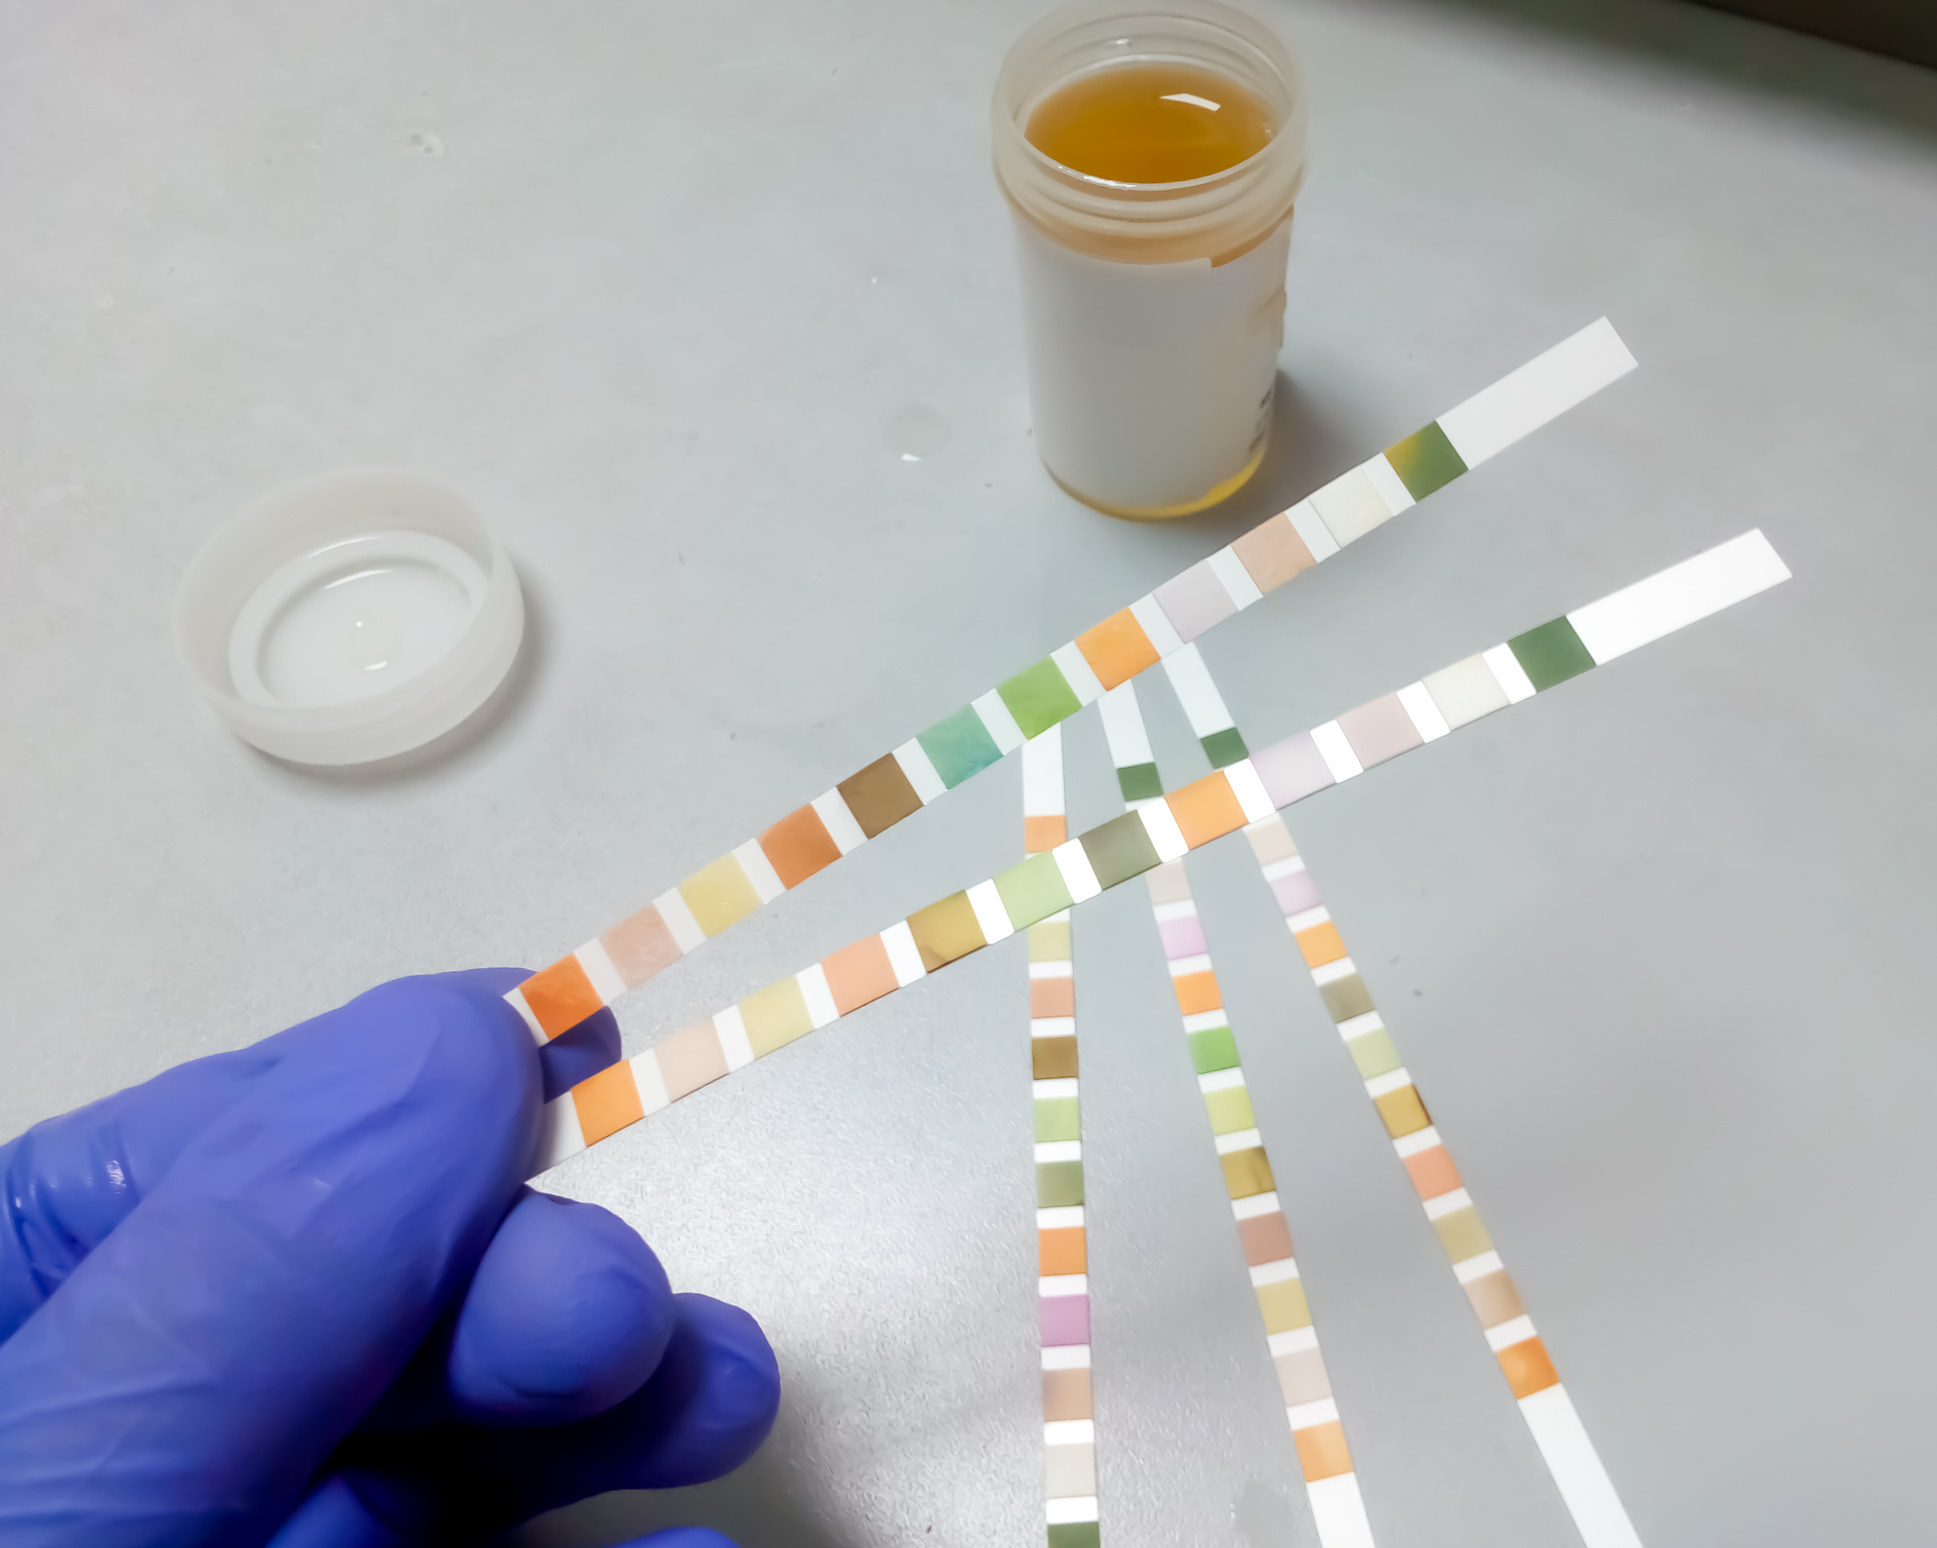 A urine sample and test strips